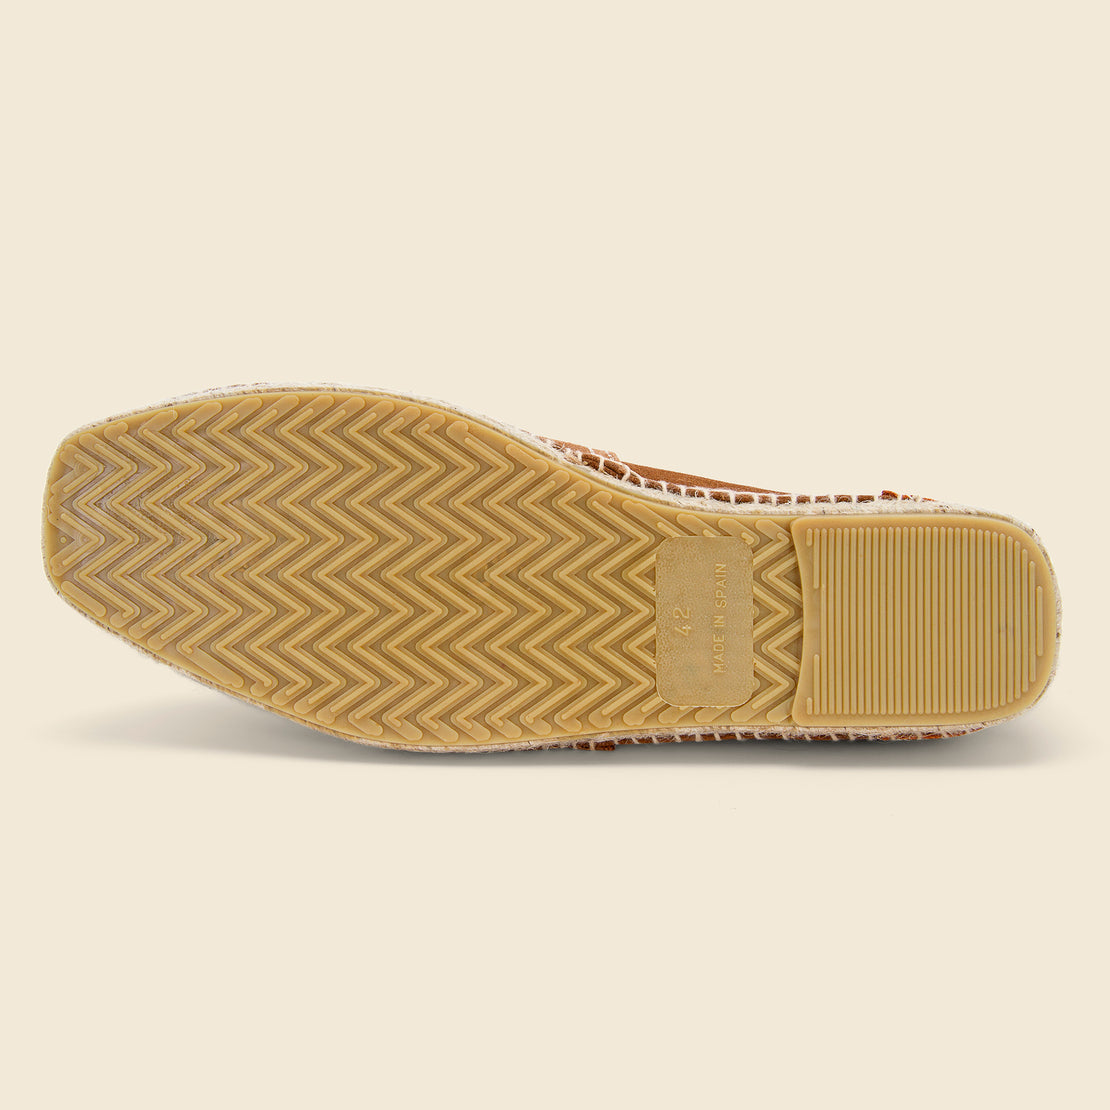 Montauk Slip On - Tan - Shoe the Bear - STAG Provisions - Shoes - Athletic